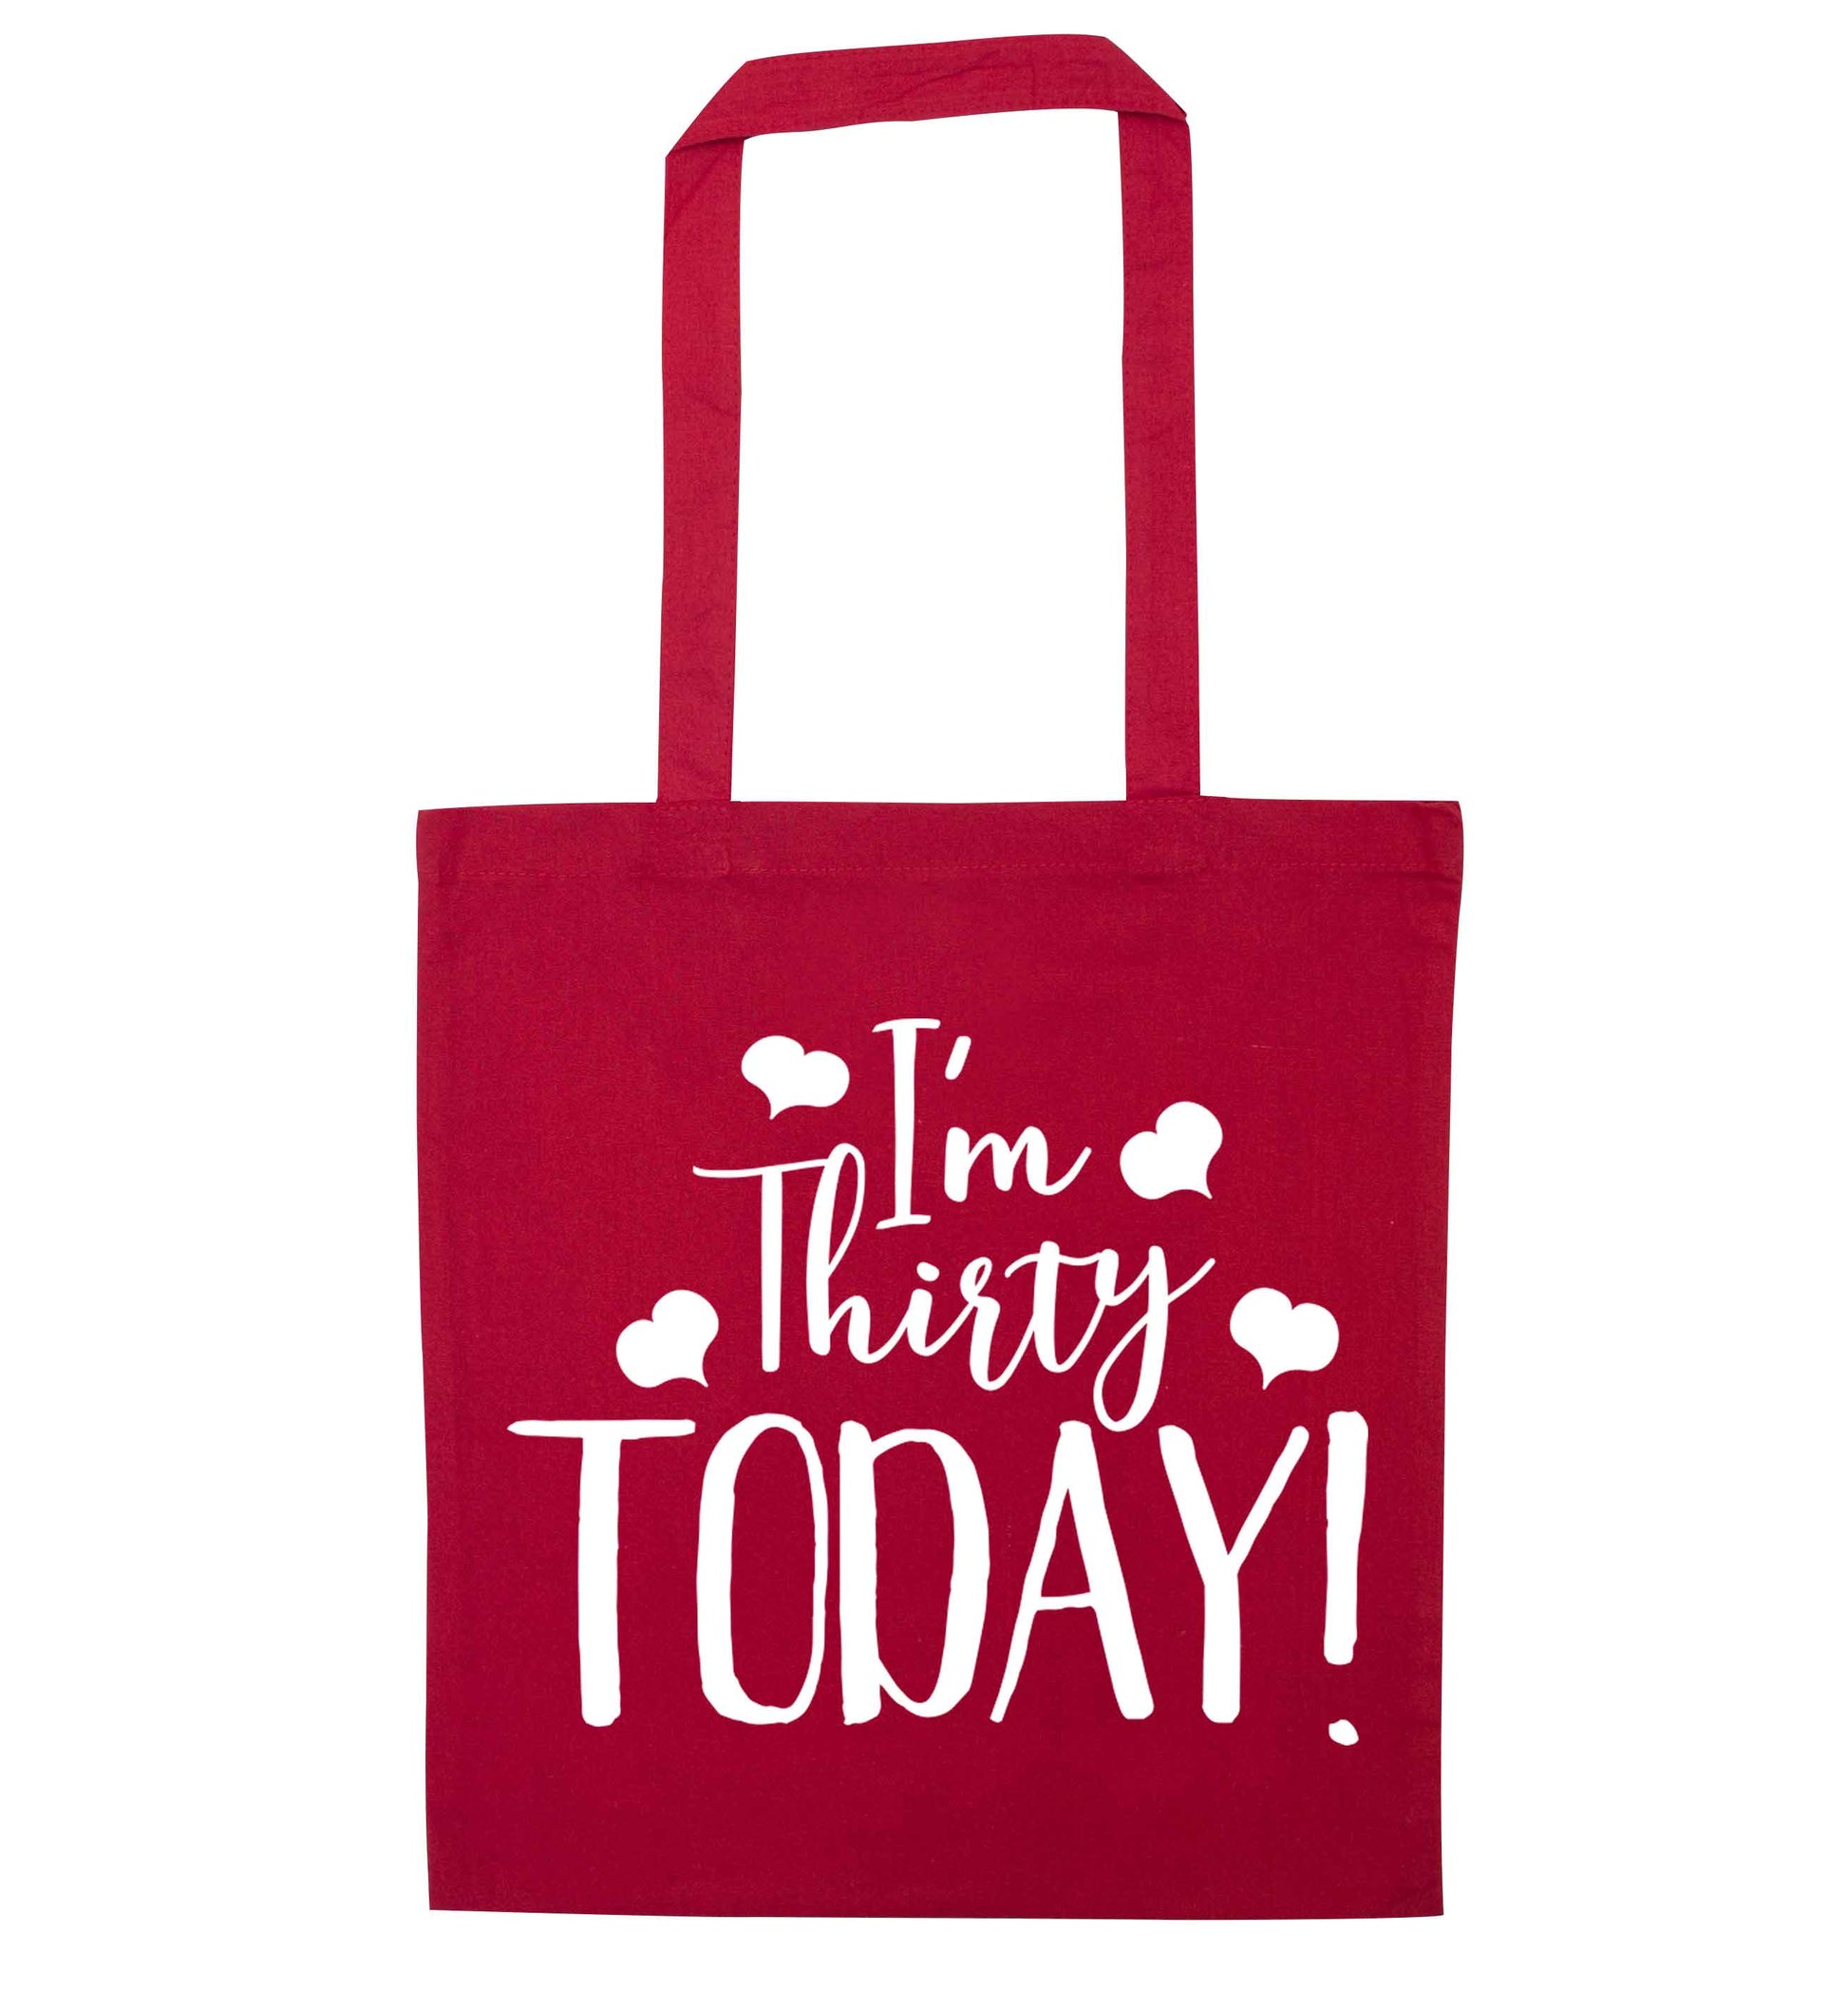 I'm thirty today! red tote bag